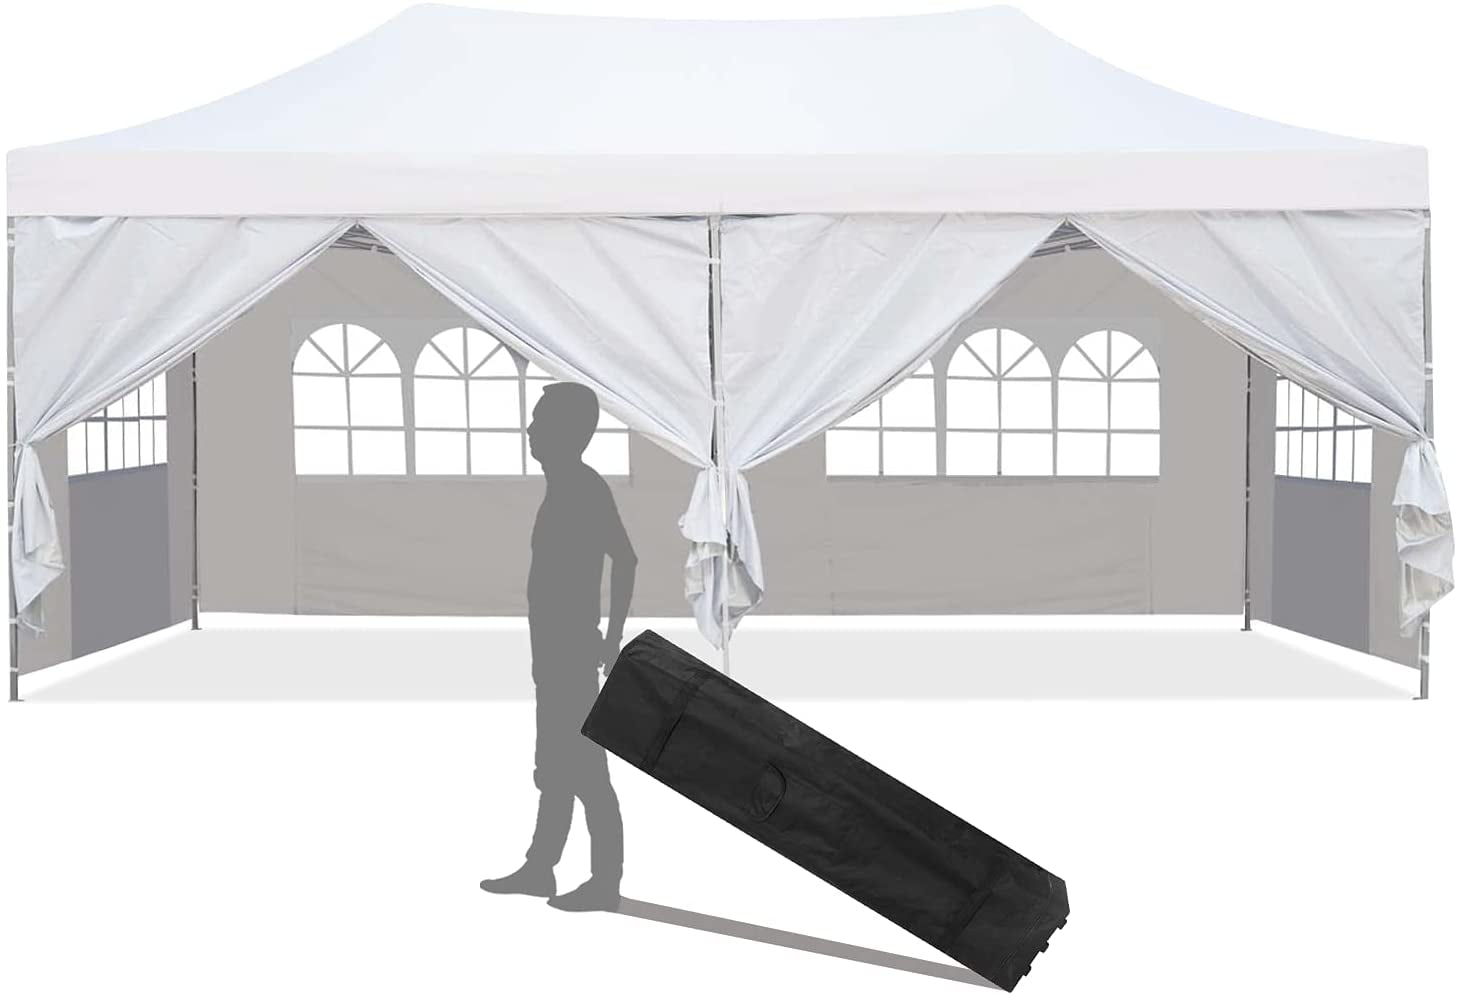 All seasons gazebo heavy duty shelter shade gazibos tent marquees with 4/6 sides 